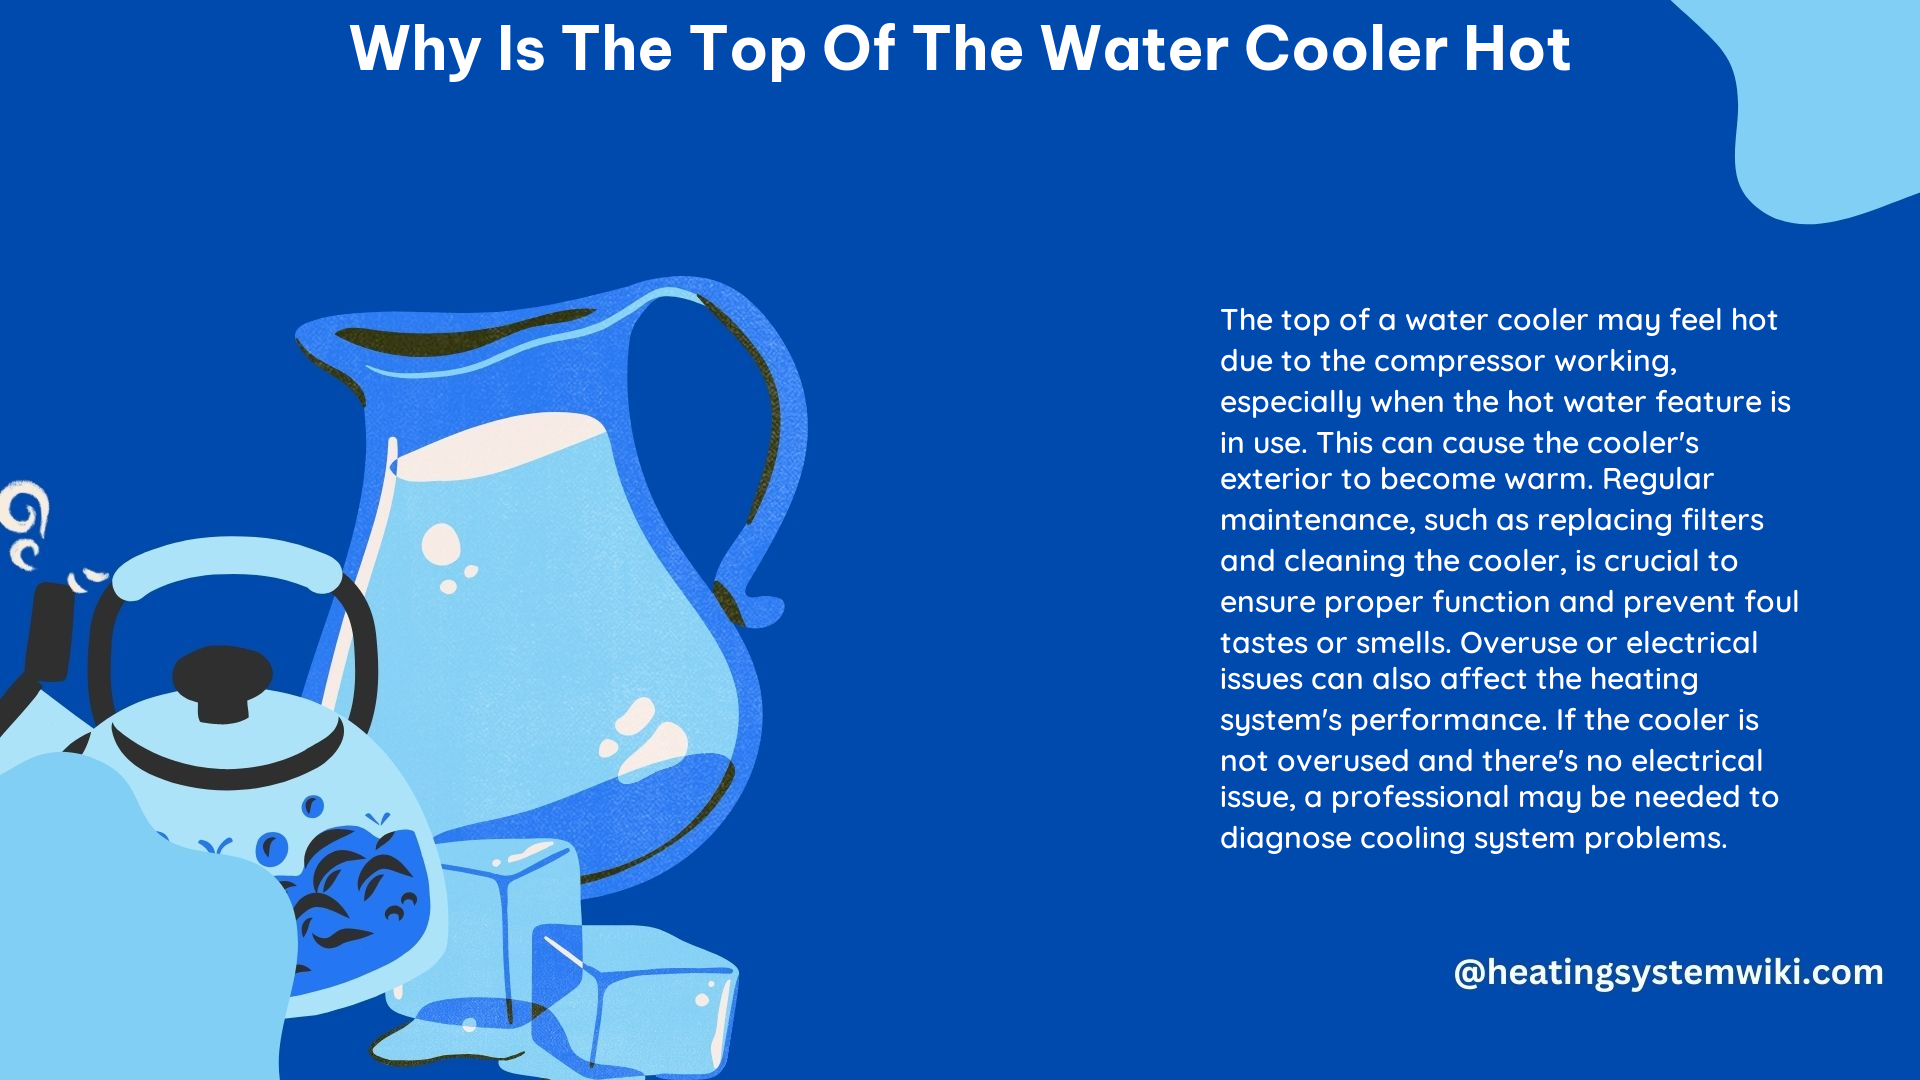 Why Is the Top of the Water Cooler Hot